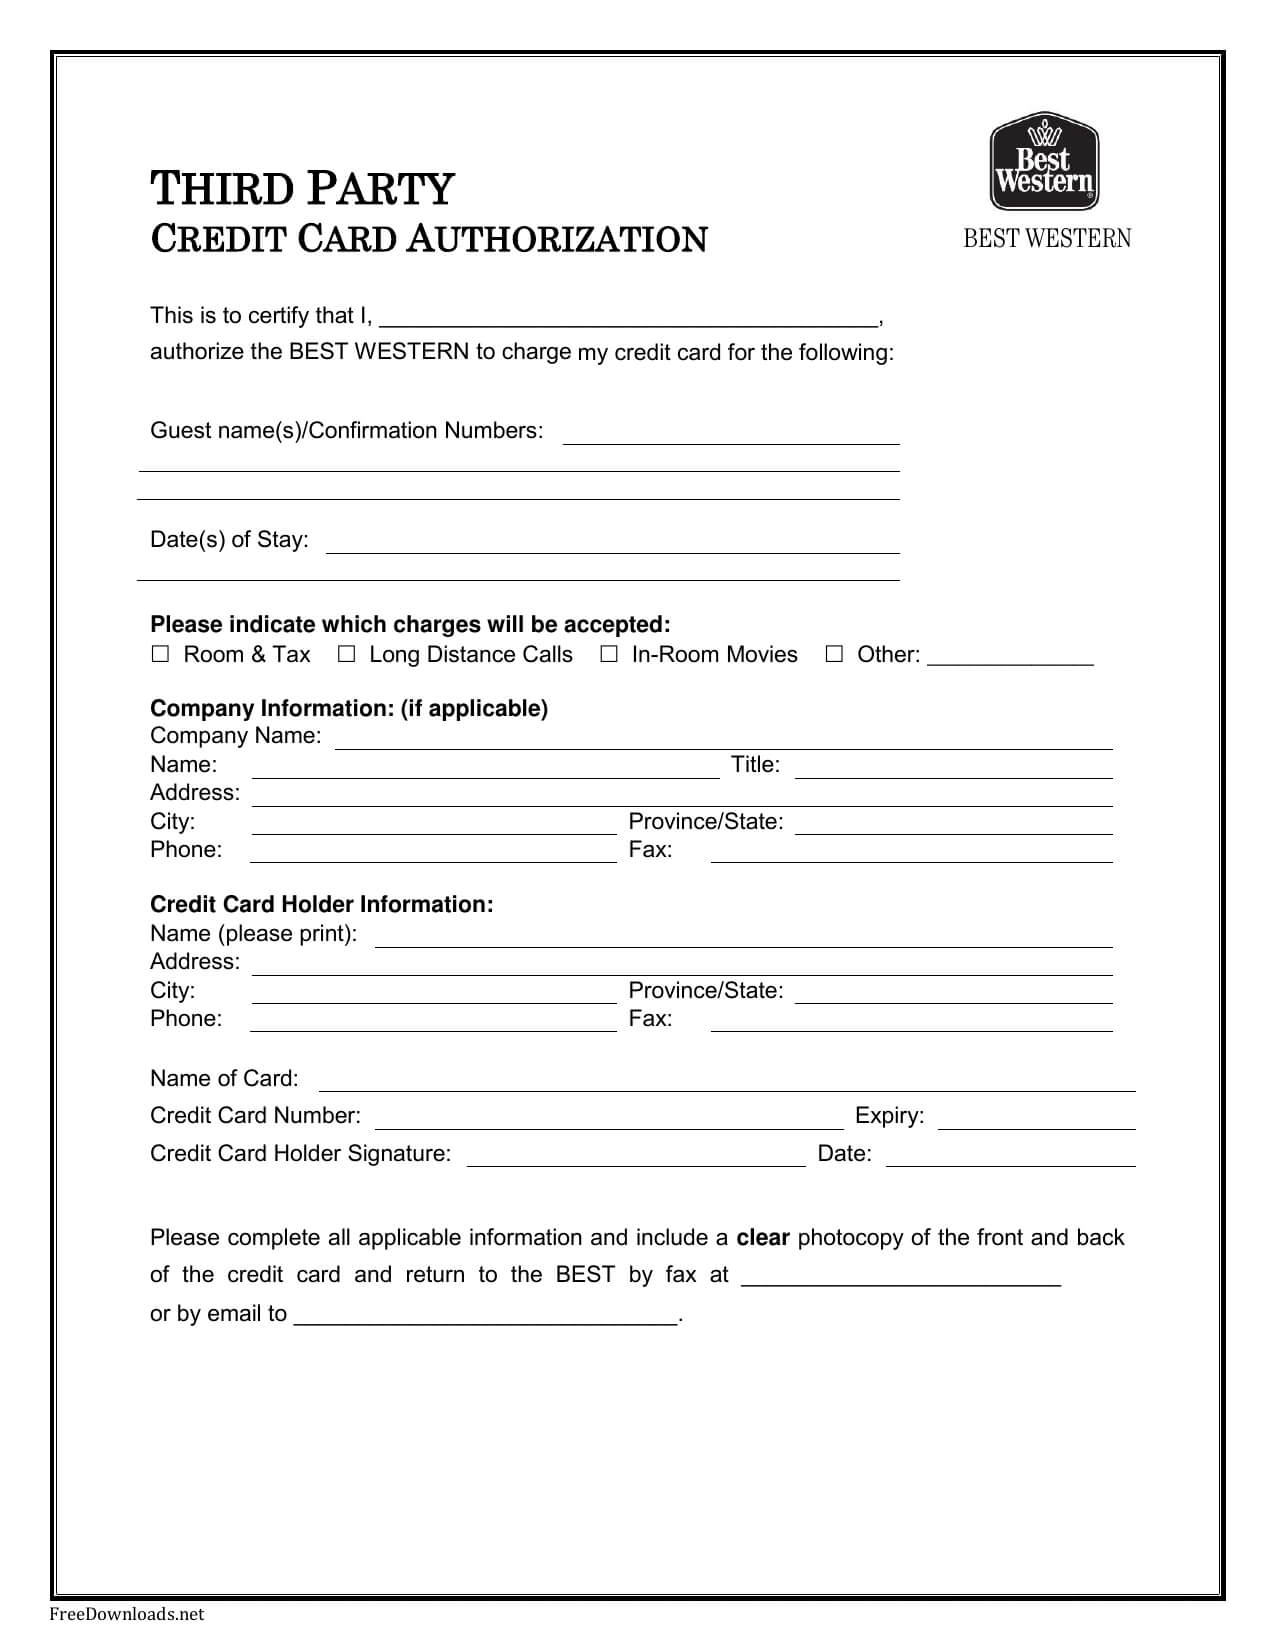 024 Credit Card Authorization Form Template Bbeif1T4 Within Credit Card Authorization Form Template Word